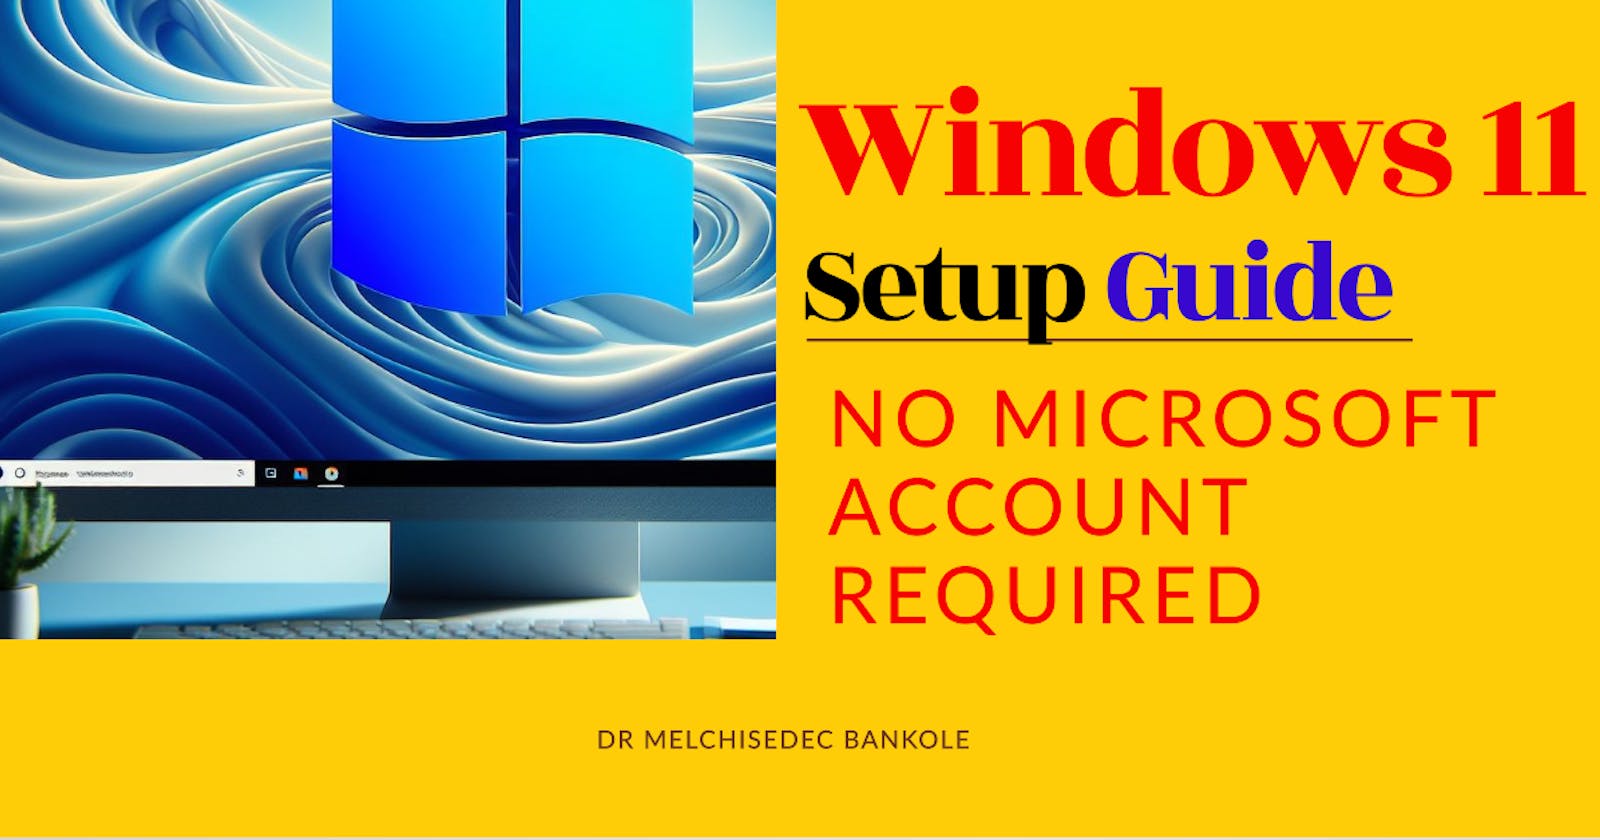 How To Setup Windows 11 Without Microsoft Account